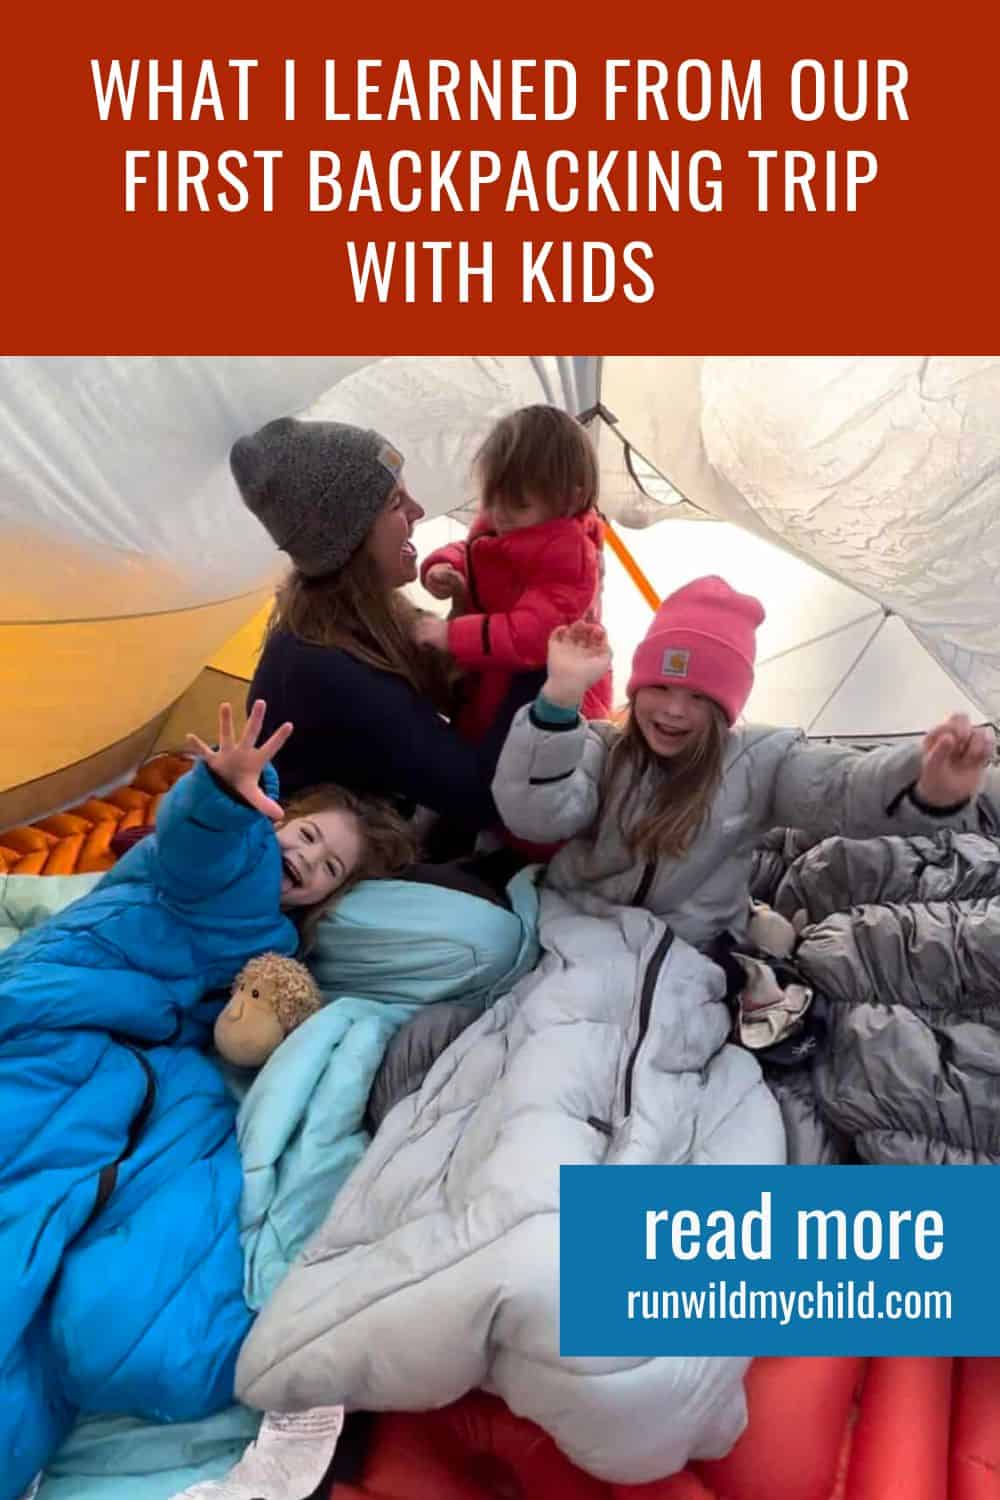 tips and advice for parents for backpacking with kids for the first time